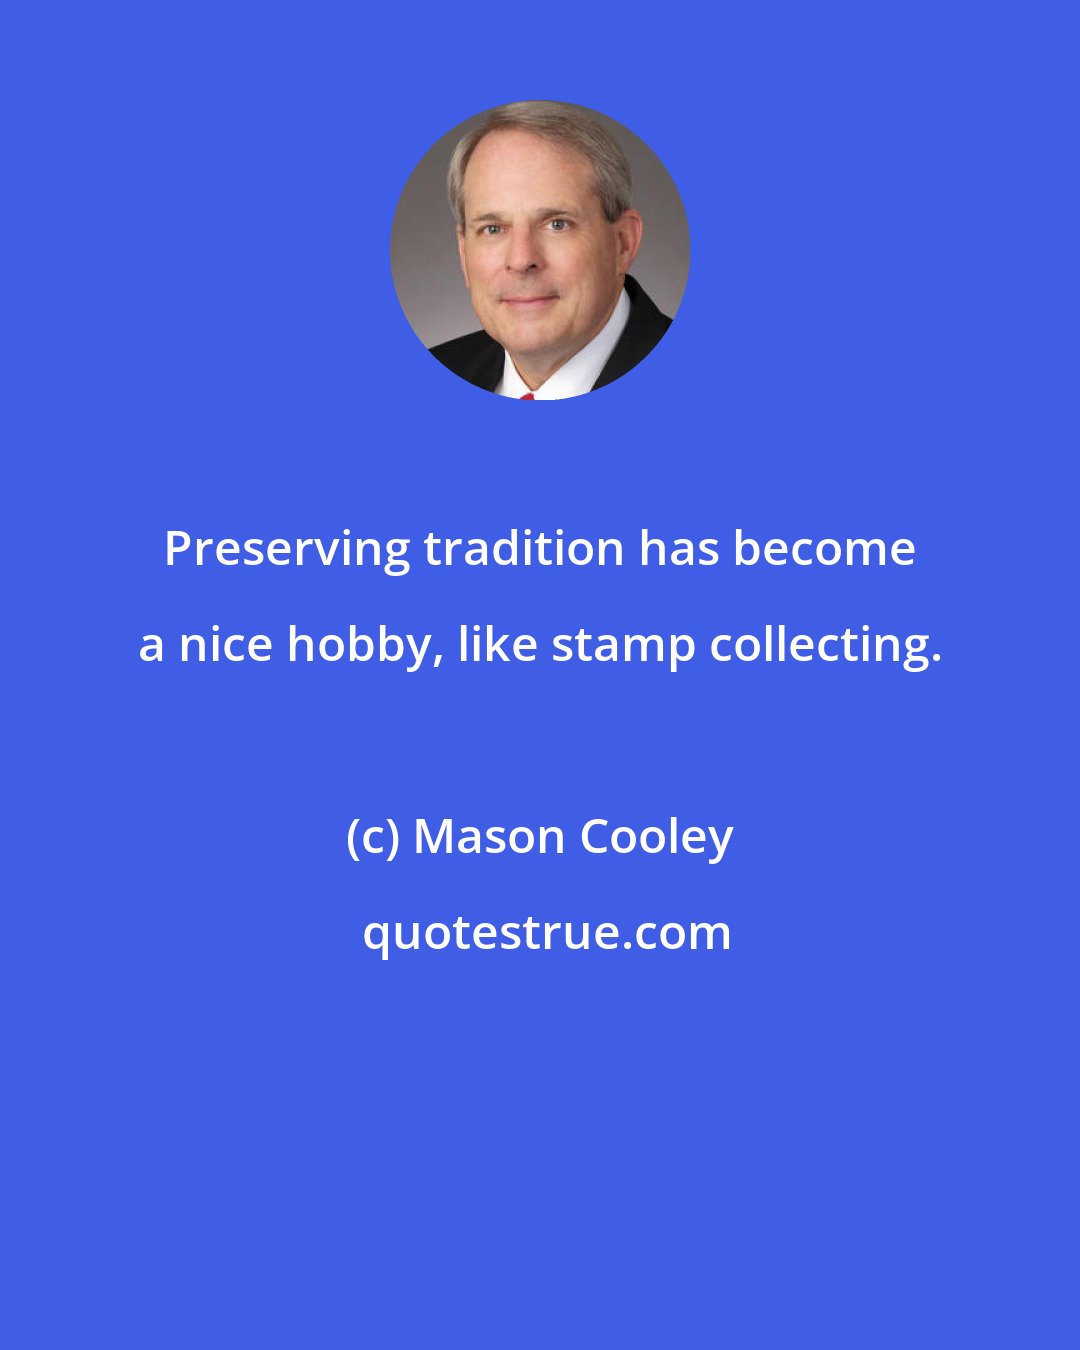 Mason Cooley: Preserving tradition has become a nice hobby, like stamp collecting.